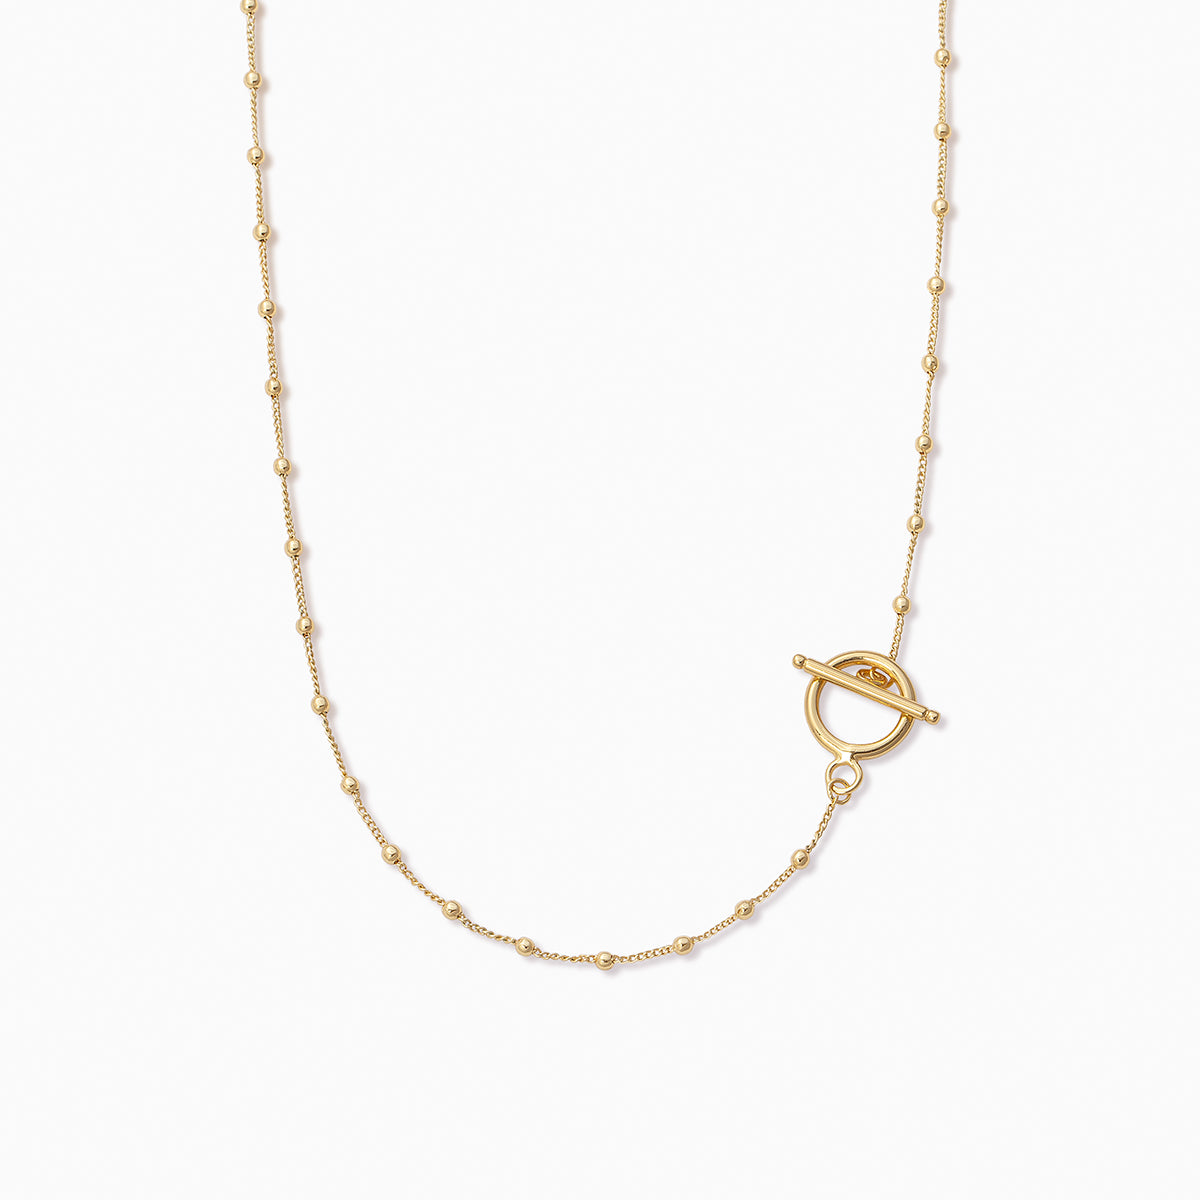 Makin Moves Necklace | Gold | Product Image | Uncommon James